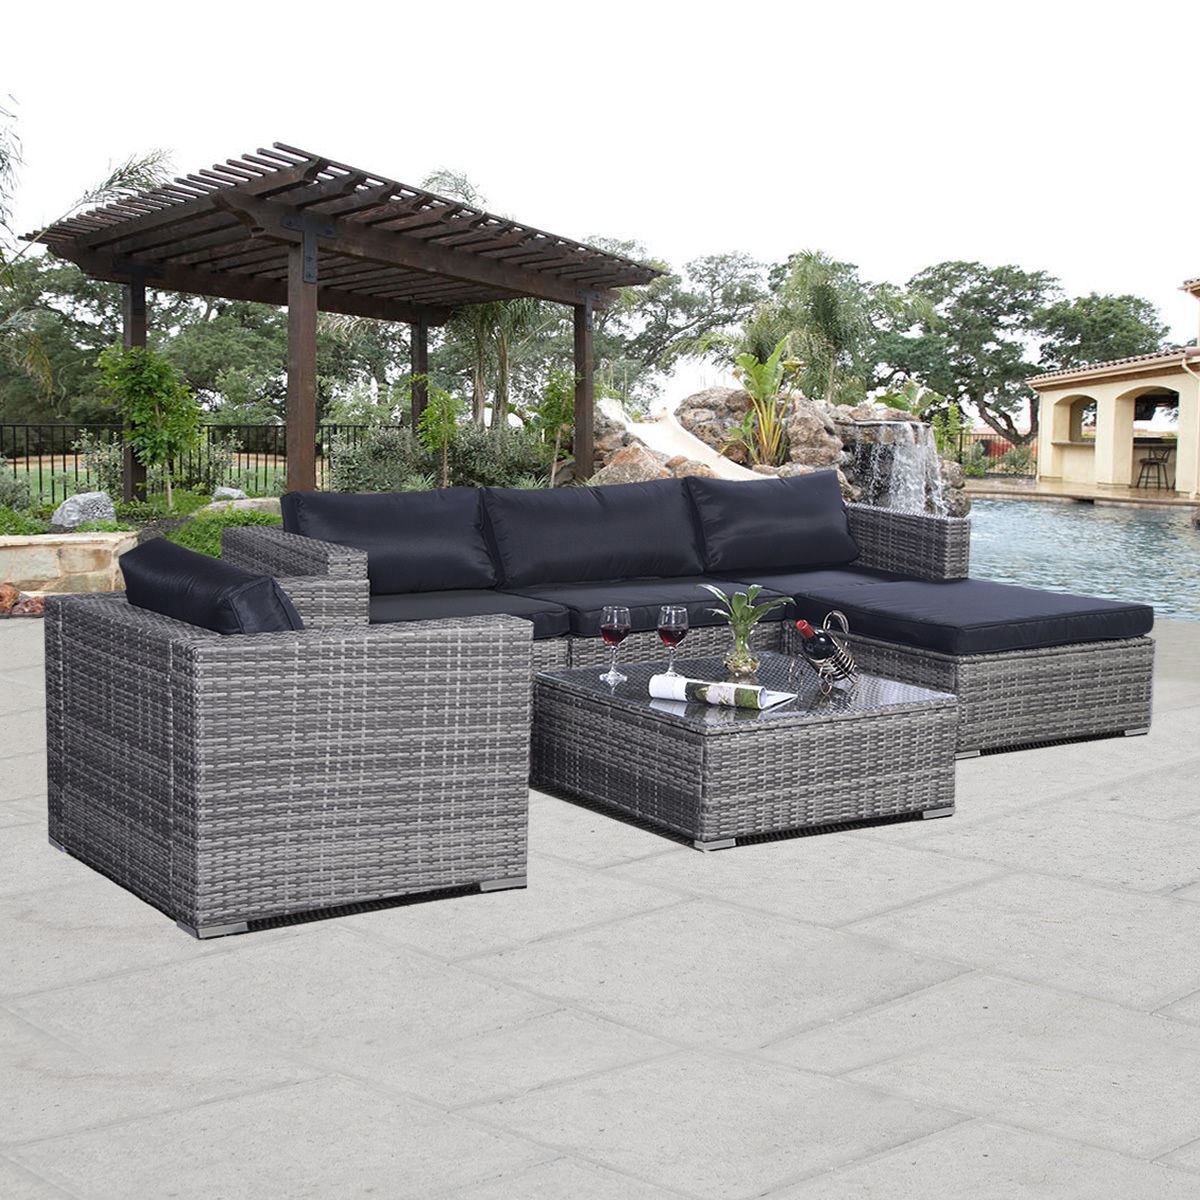 outdoor wicker furniture covers photo - 2